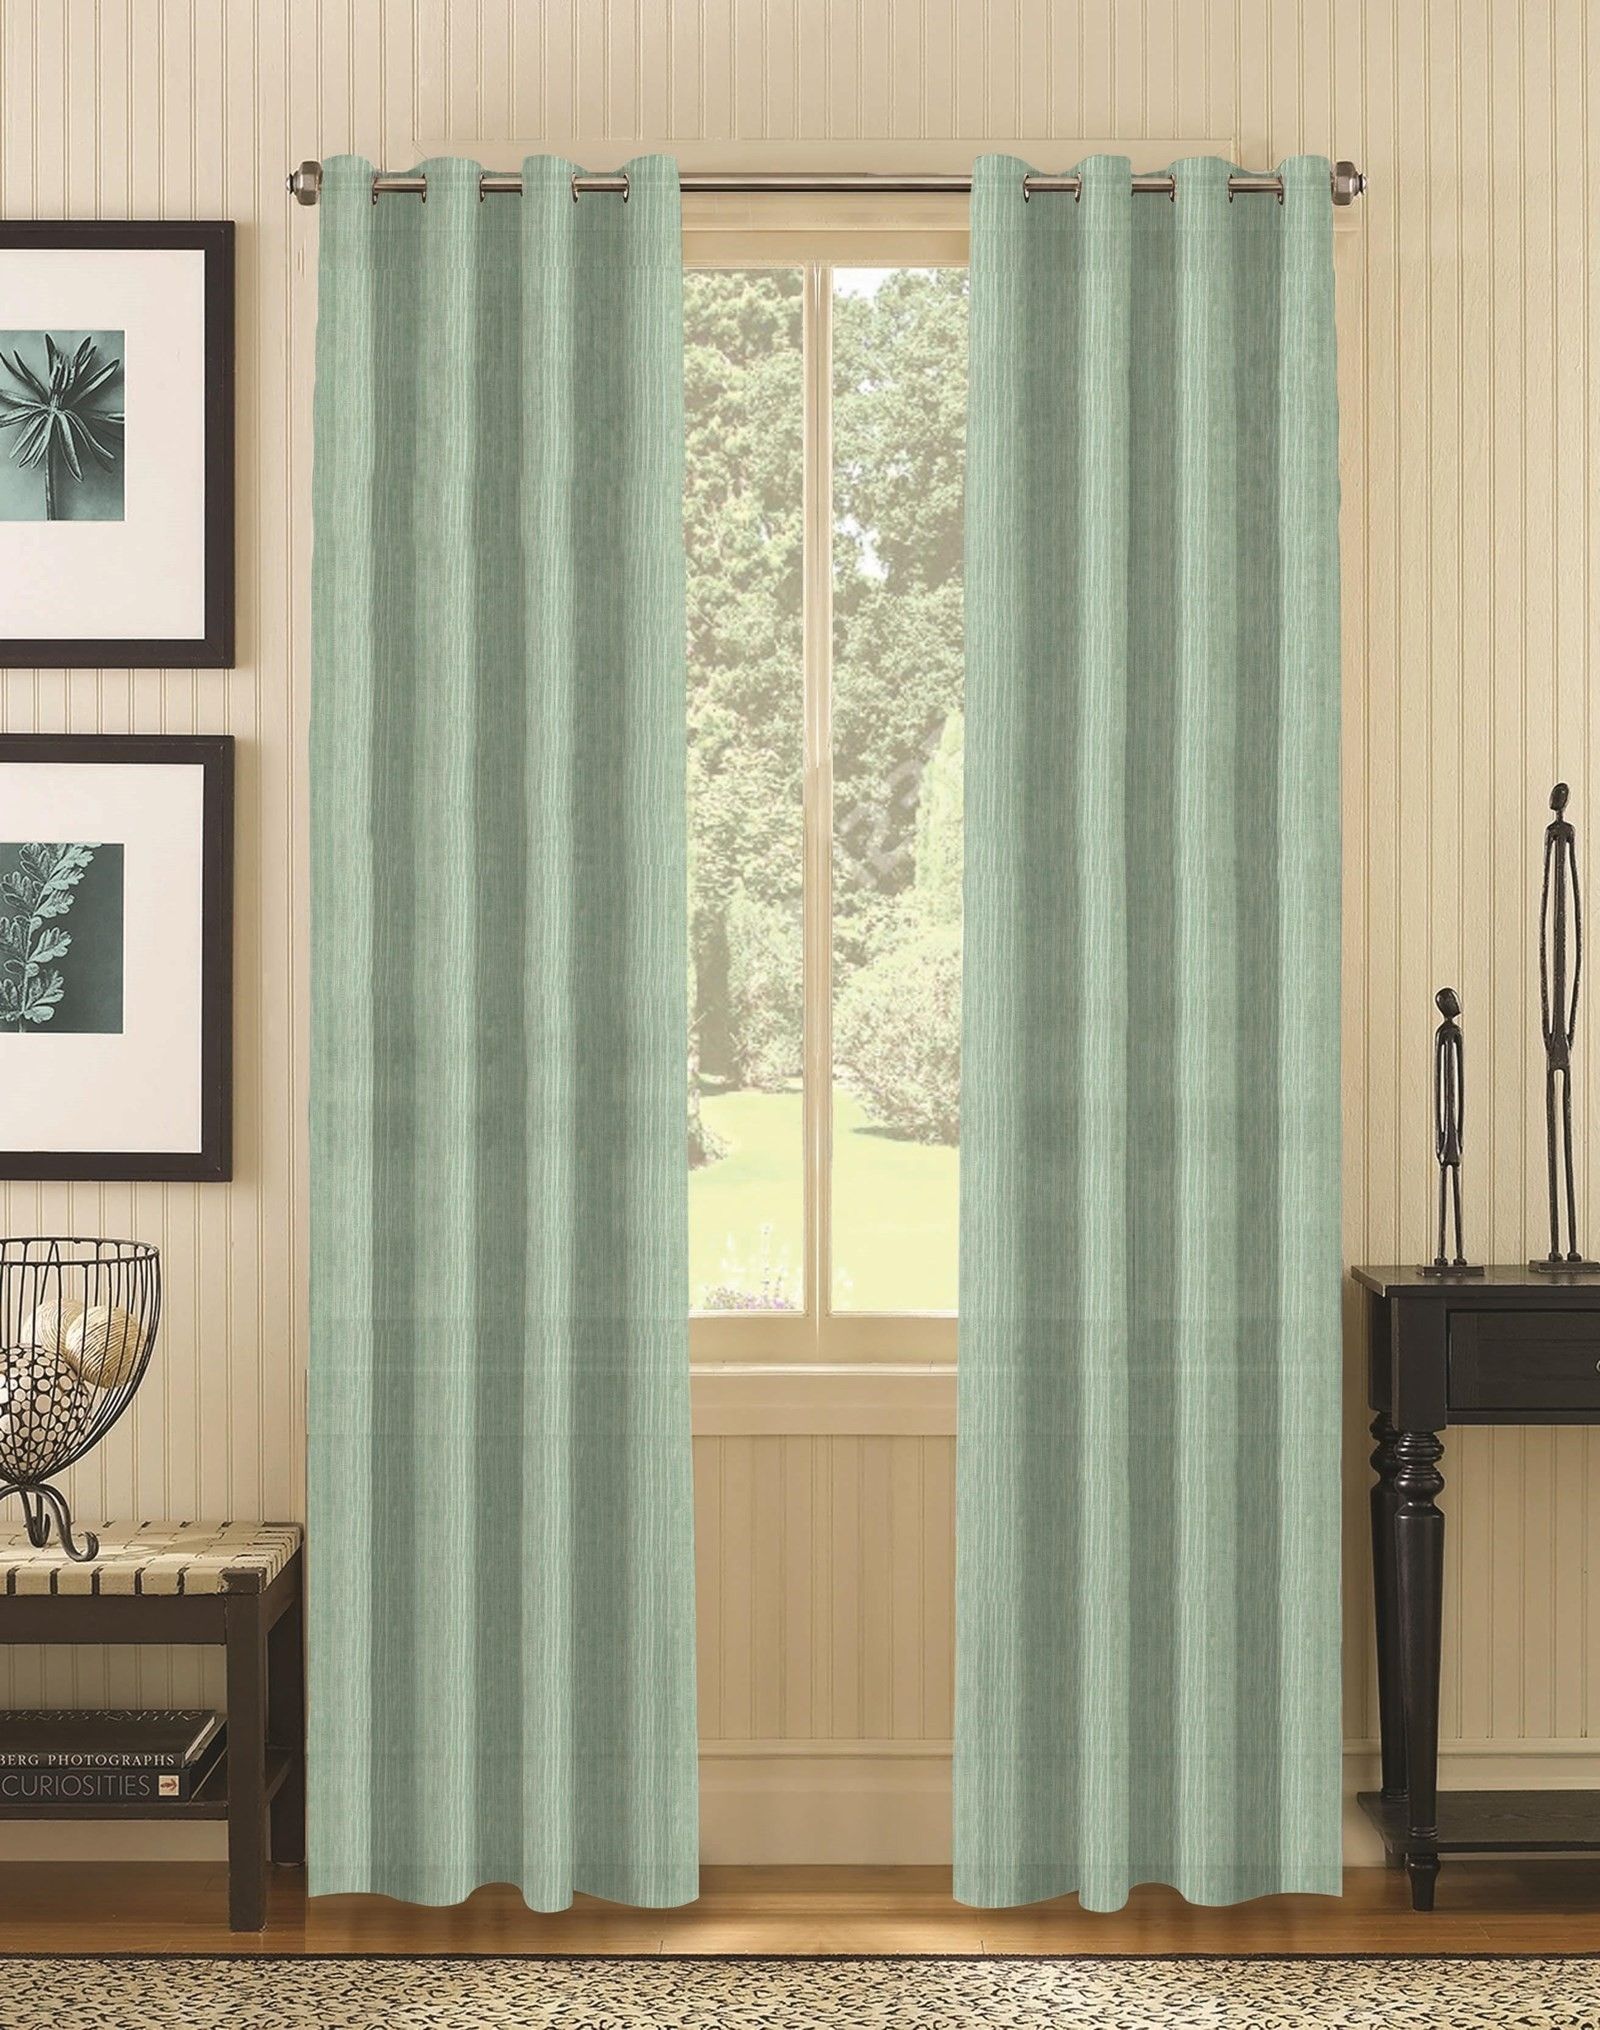 Pome Duck Egg Sheer Eyelet Curtain Within Sheer Eyelet Curtains (View 8 of 15)